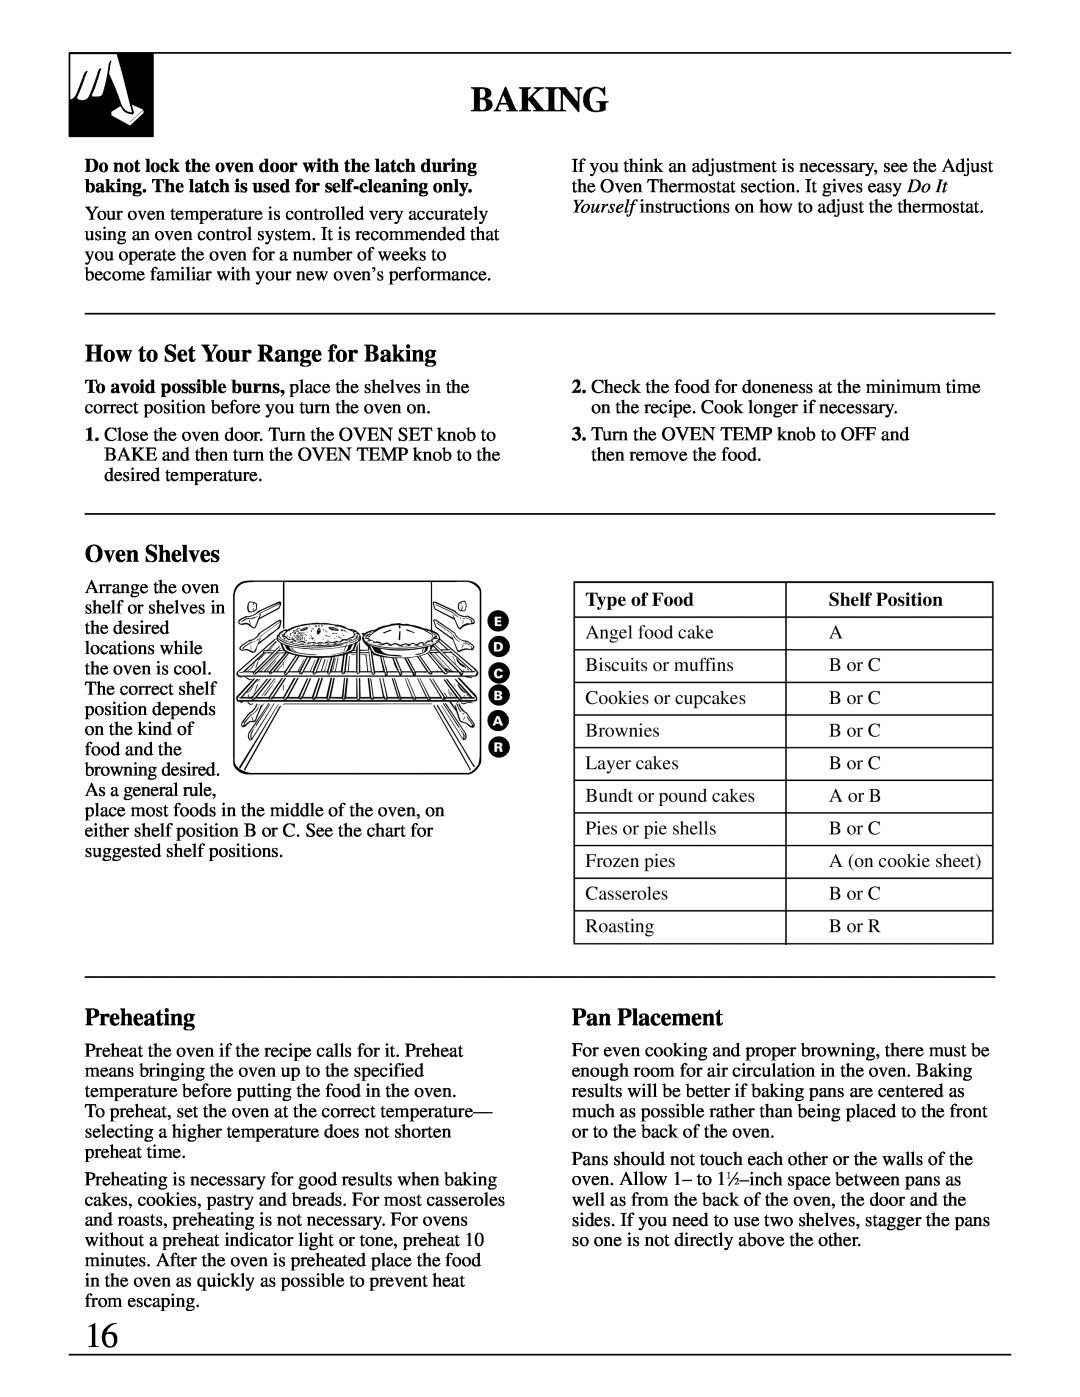 Hotpoint RGB744 installation instructions How to Set Your Range for Baking, Preheating, Pan Placement, Oven Shelves 